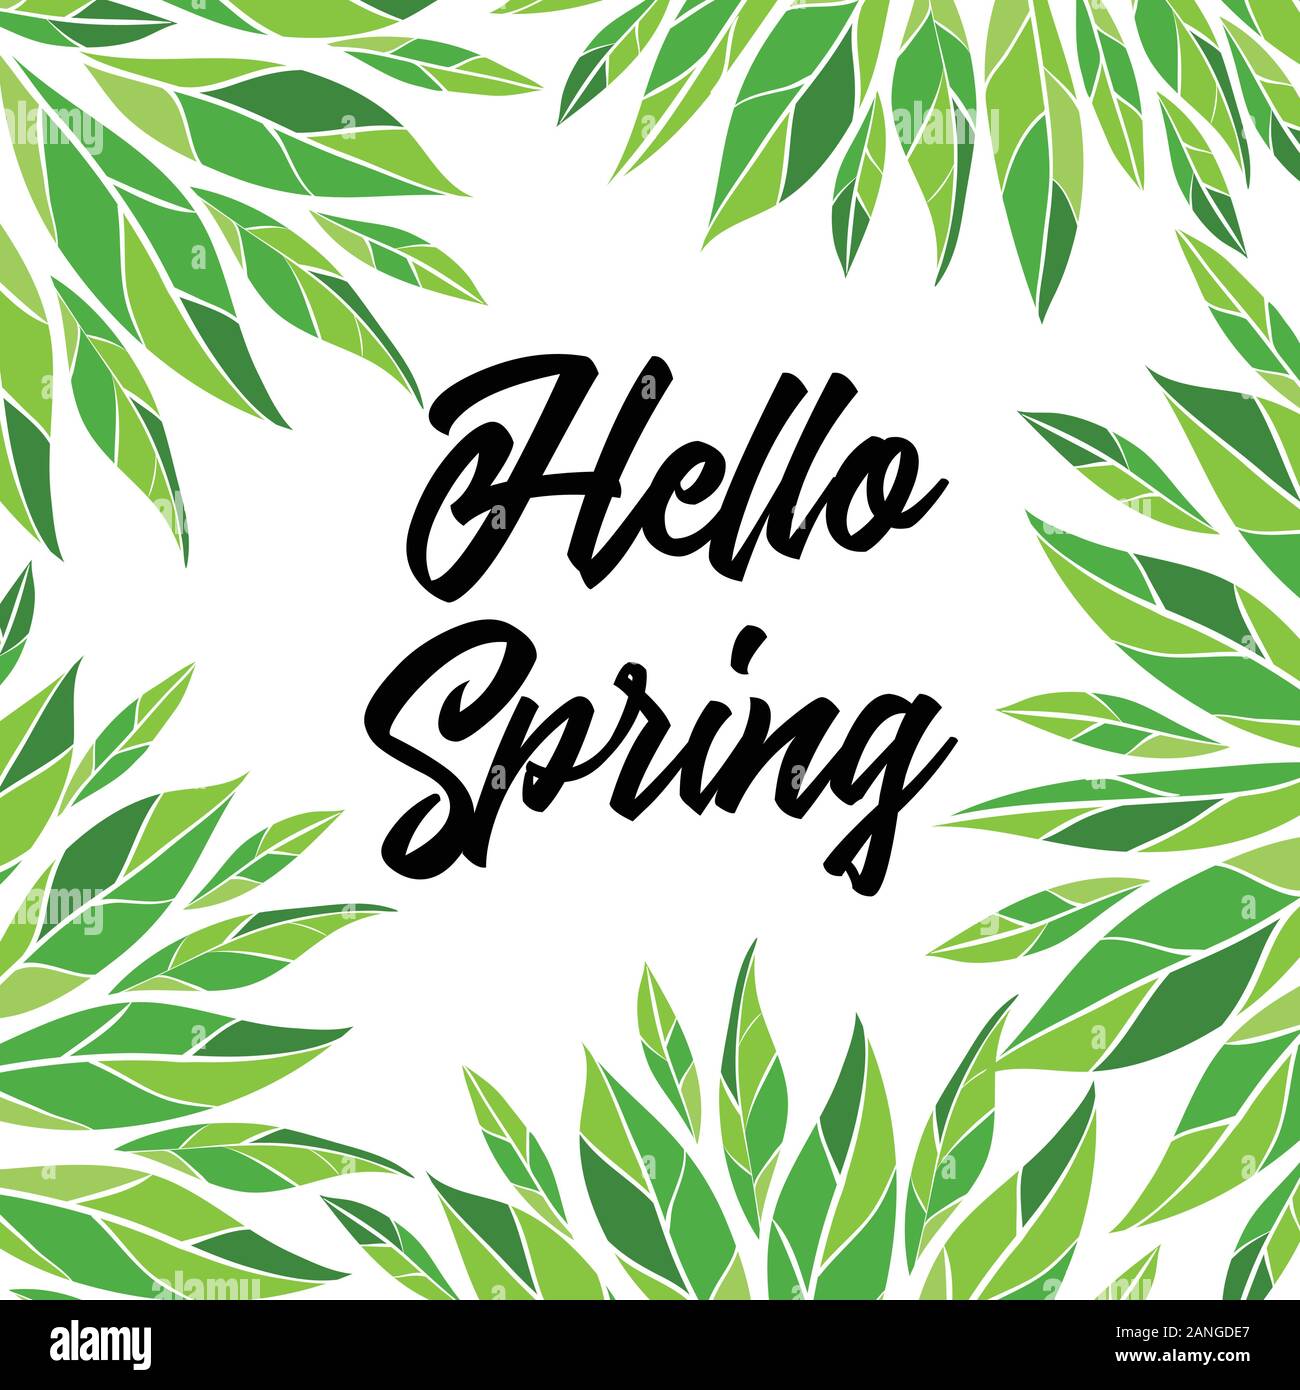 Hello spring. Vector card with lettering Stock Vector